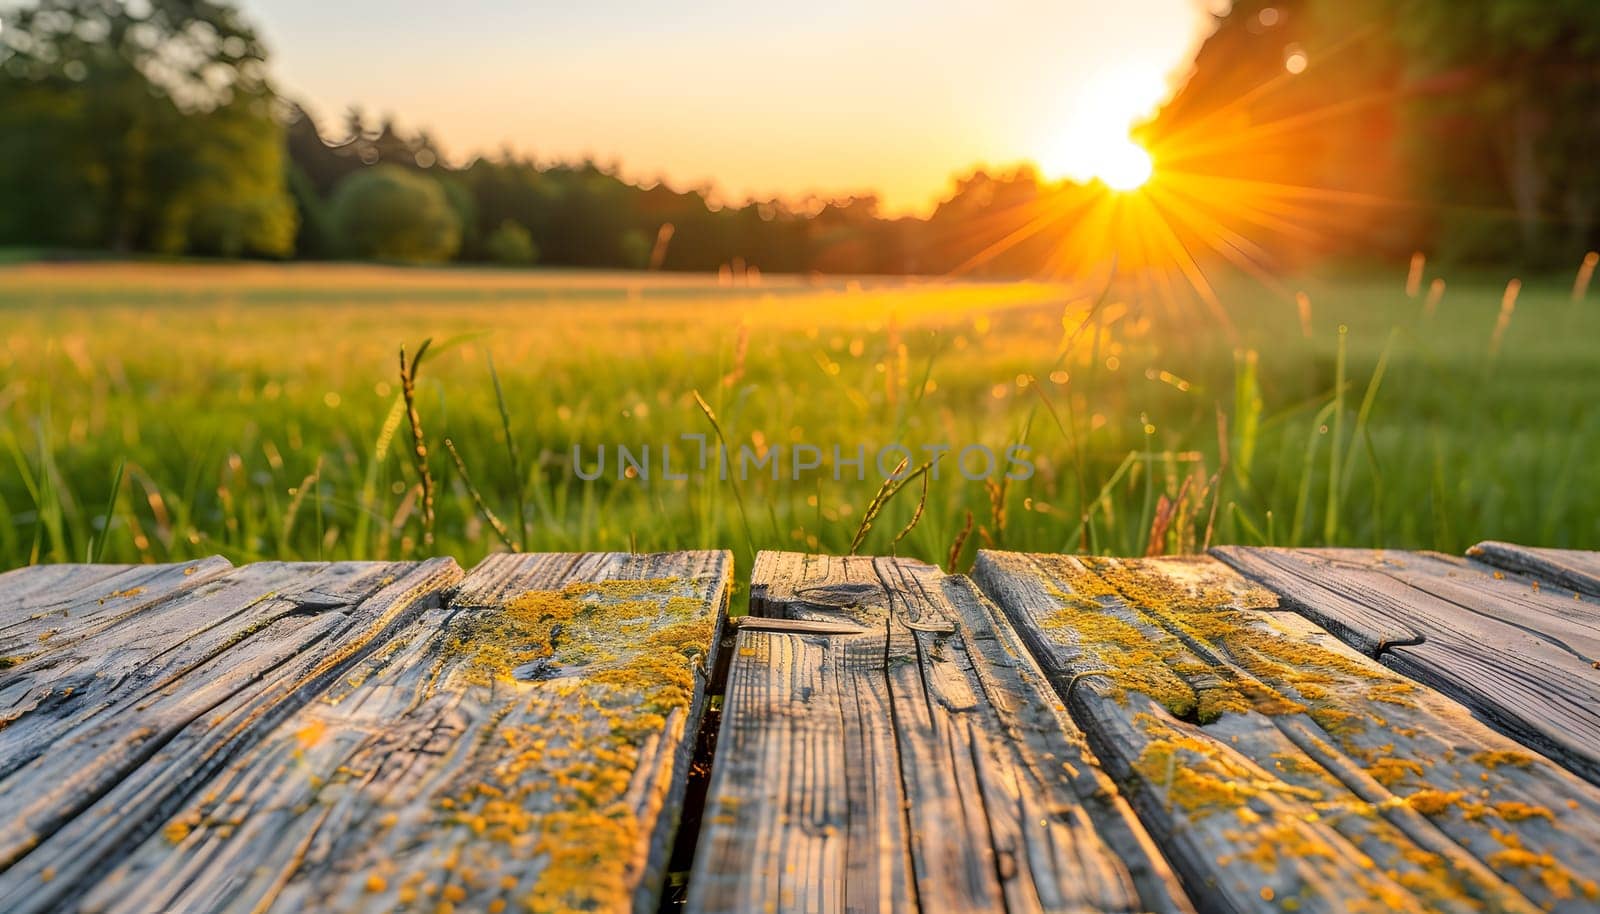 The sun sets over a grassy field and wooden deck in the foreground, creating a stunning natural landscape in the Ecoregion. Views of the sky, light, and vegetation blend with people in nature